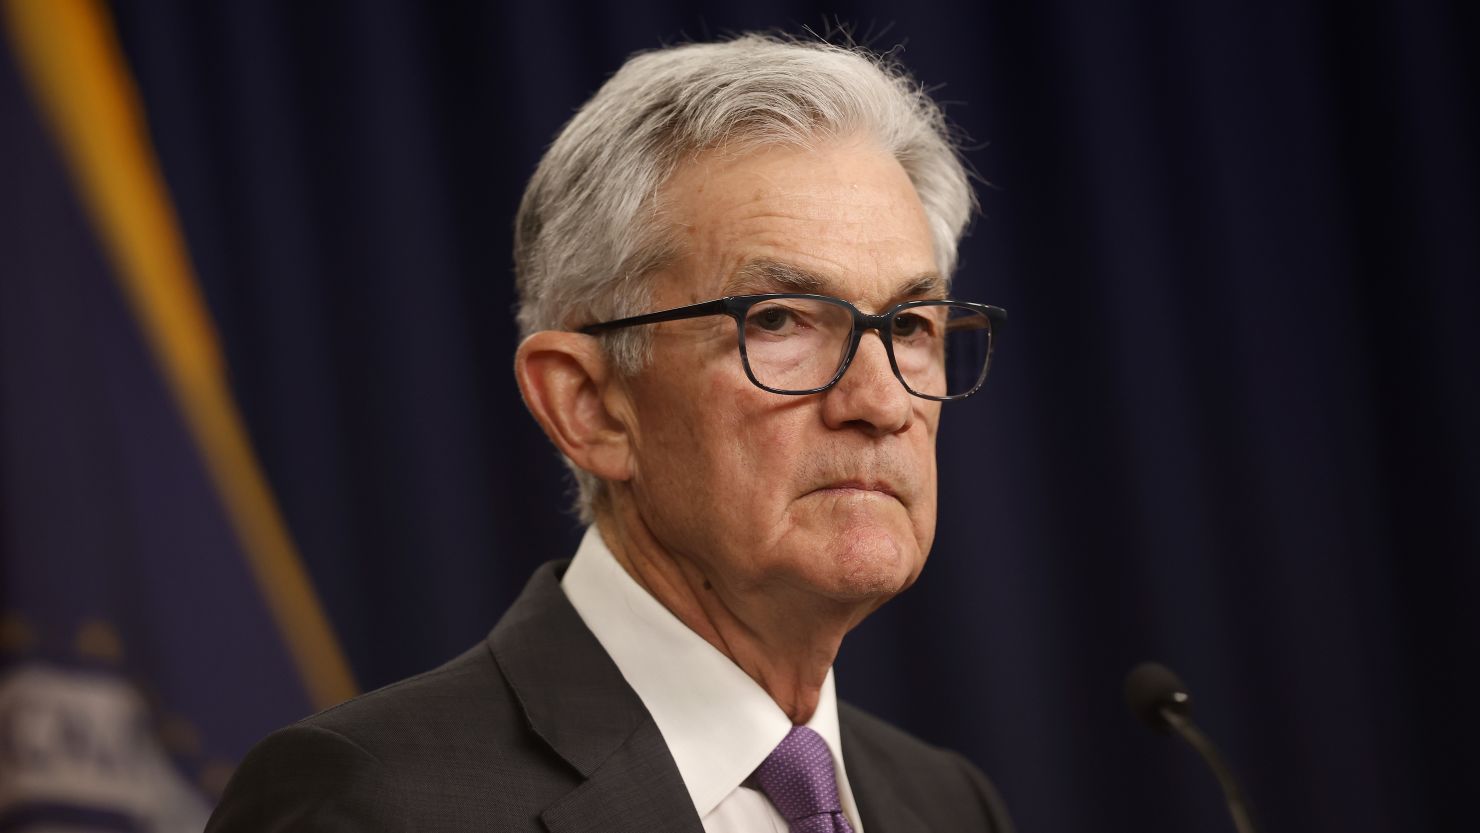 Federal Reserve Chair Jerome Powell reaffirms the central bank's anticipation of interest-rate cuts this year despite stronger-than-expected economic activity, citing the expectation of declining inflation. 

Image Source: CNN 